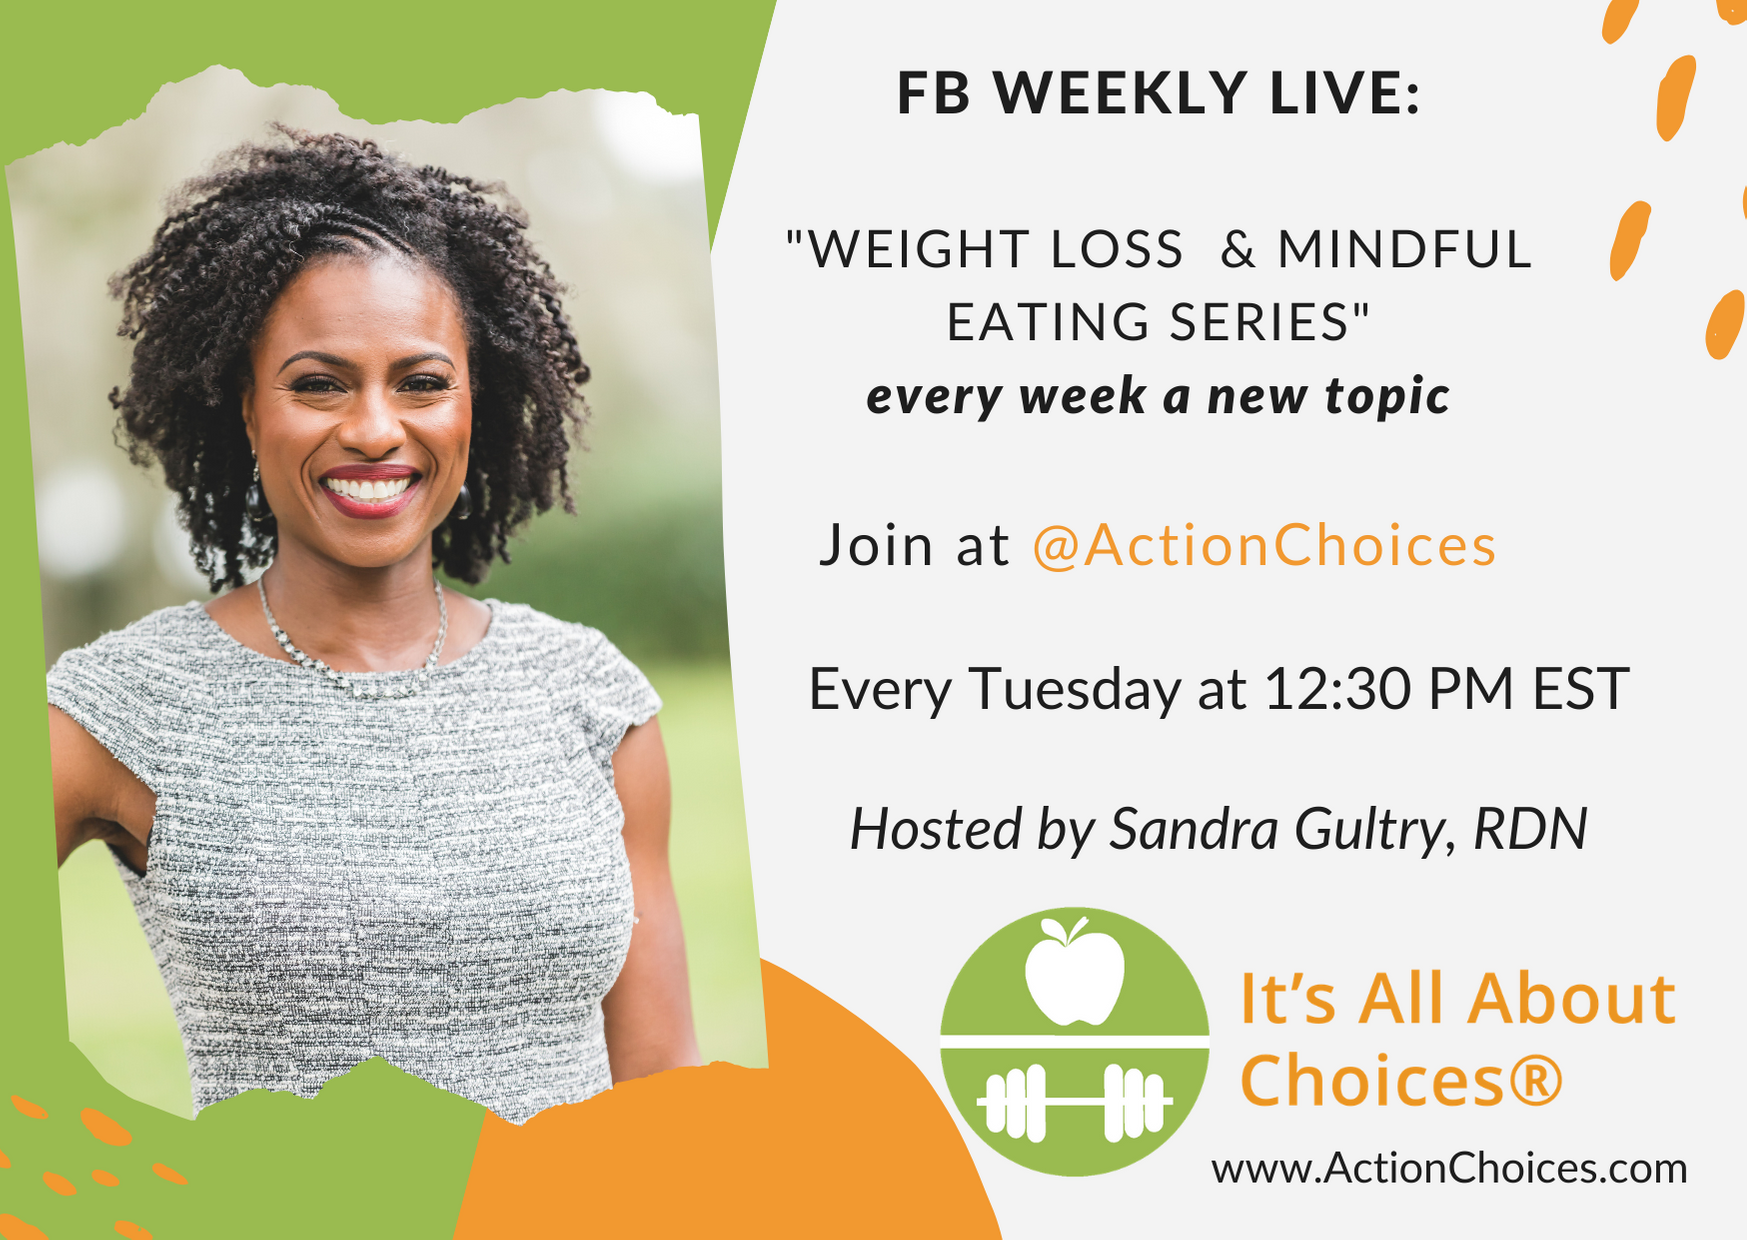 Weight Loss and Mindful Eating Series